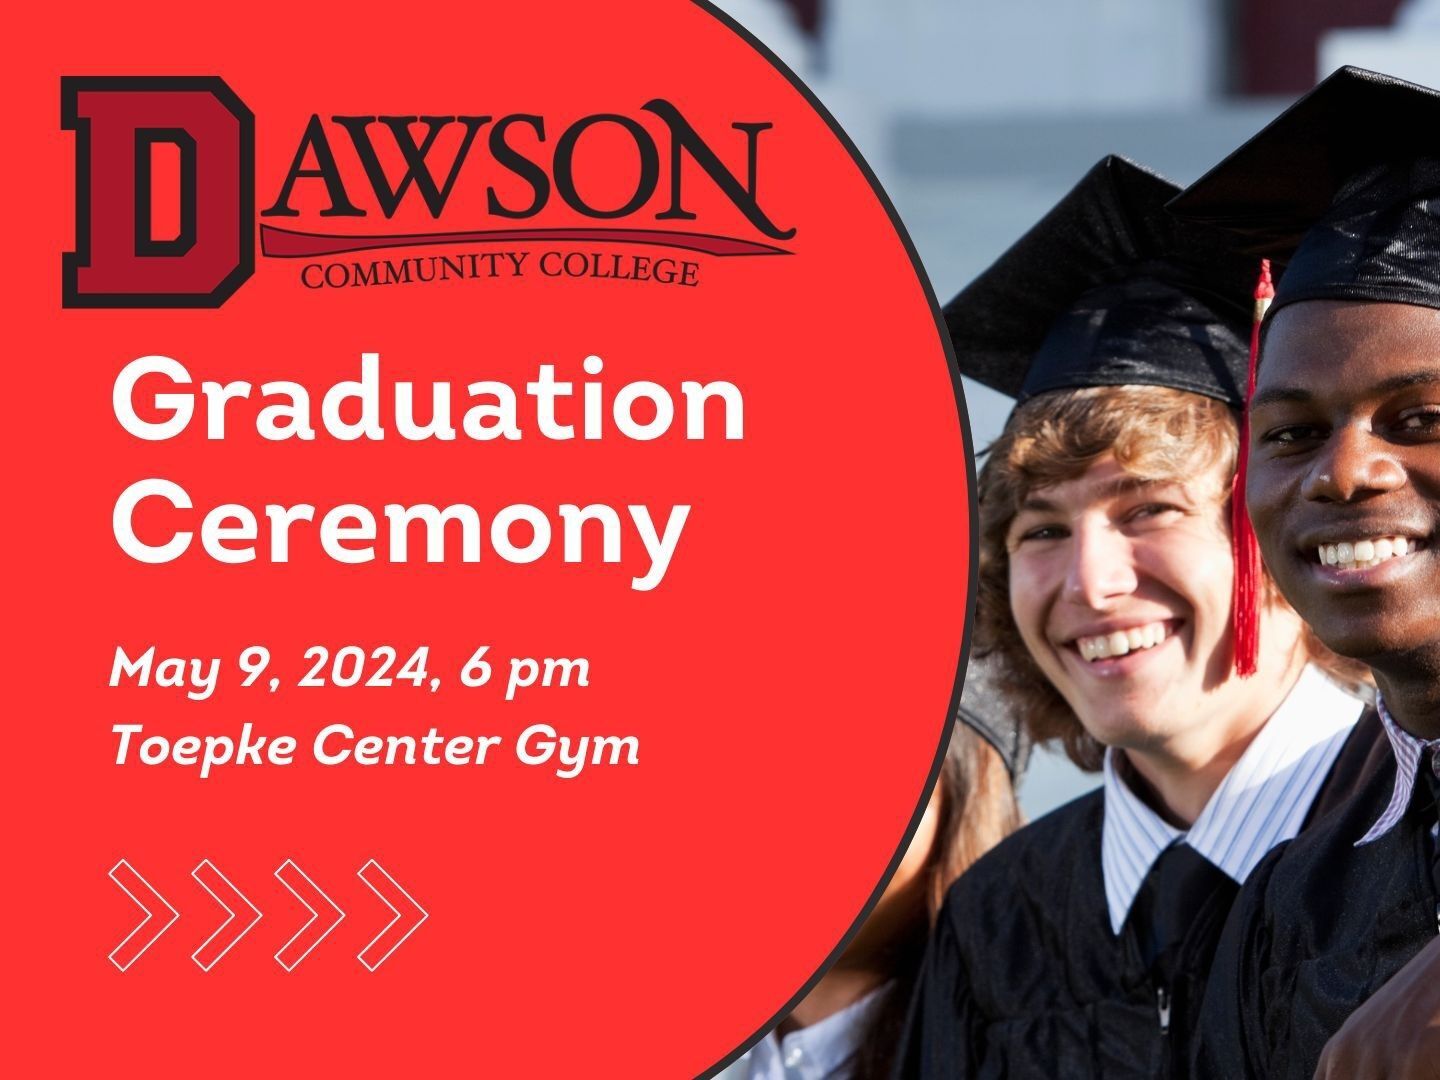 Graduation Ceremony May 9th at 6 pm